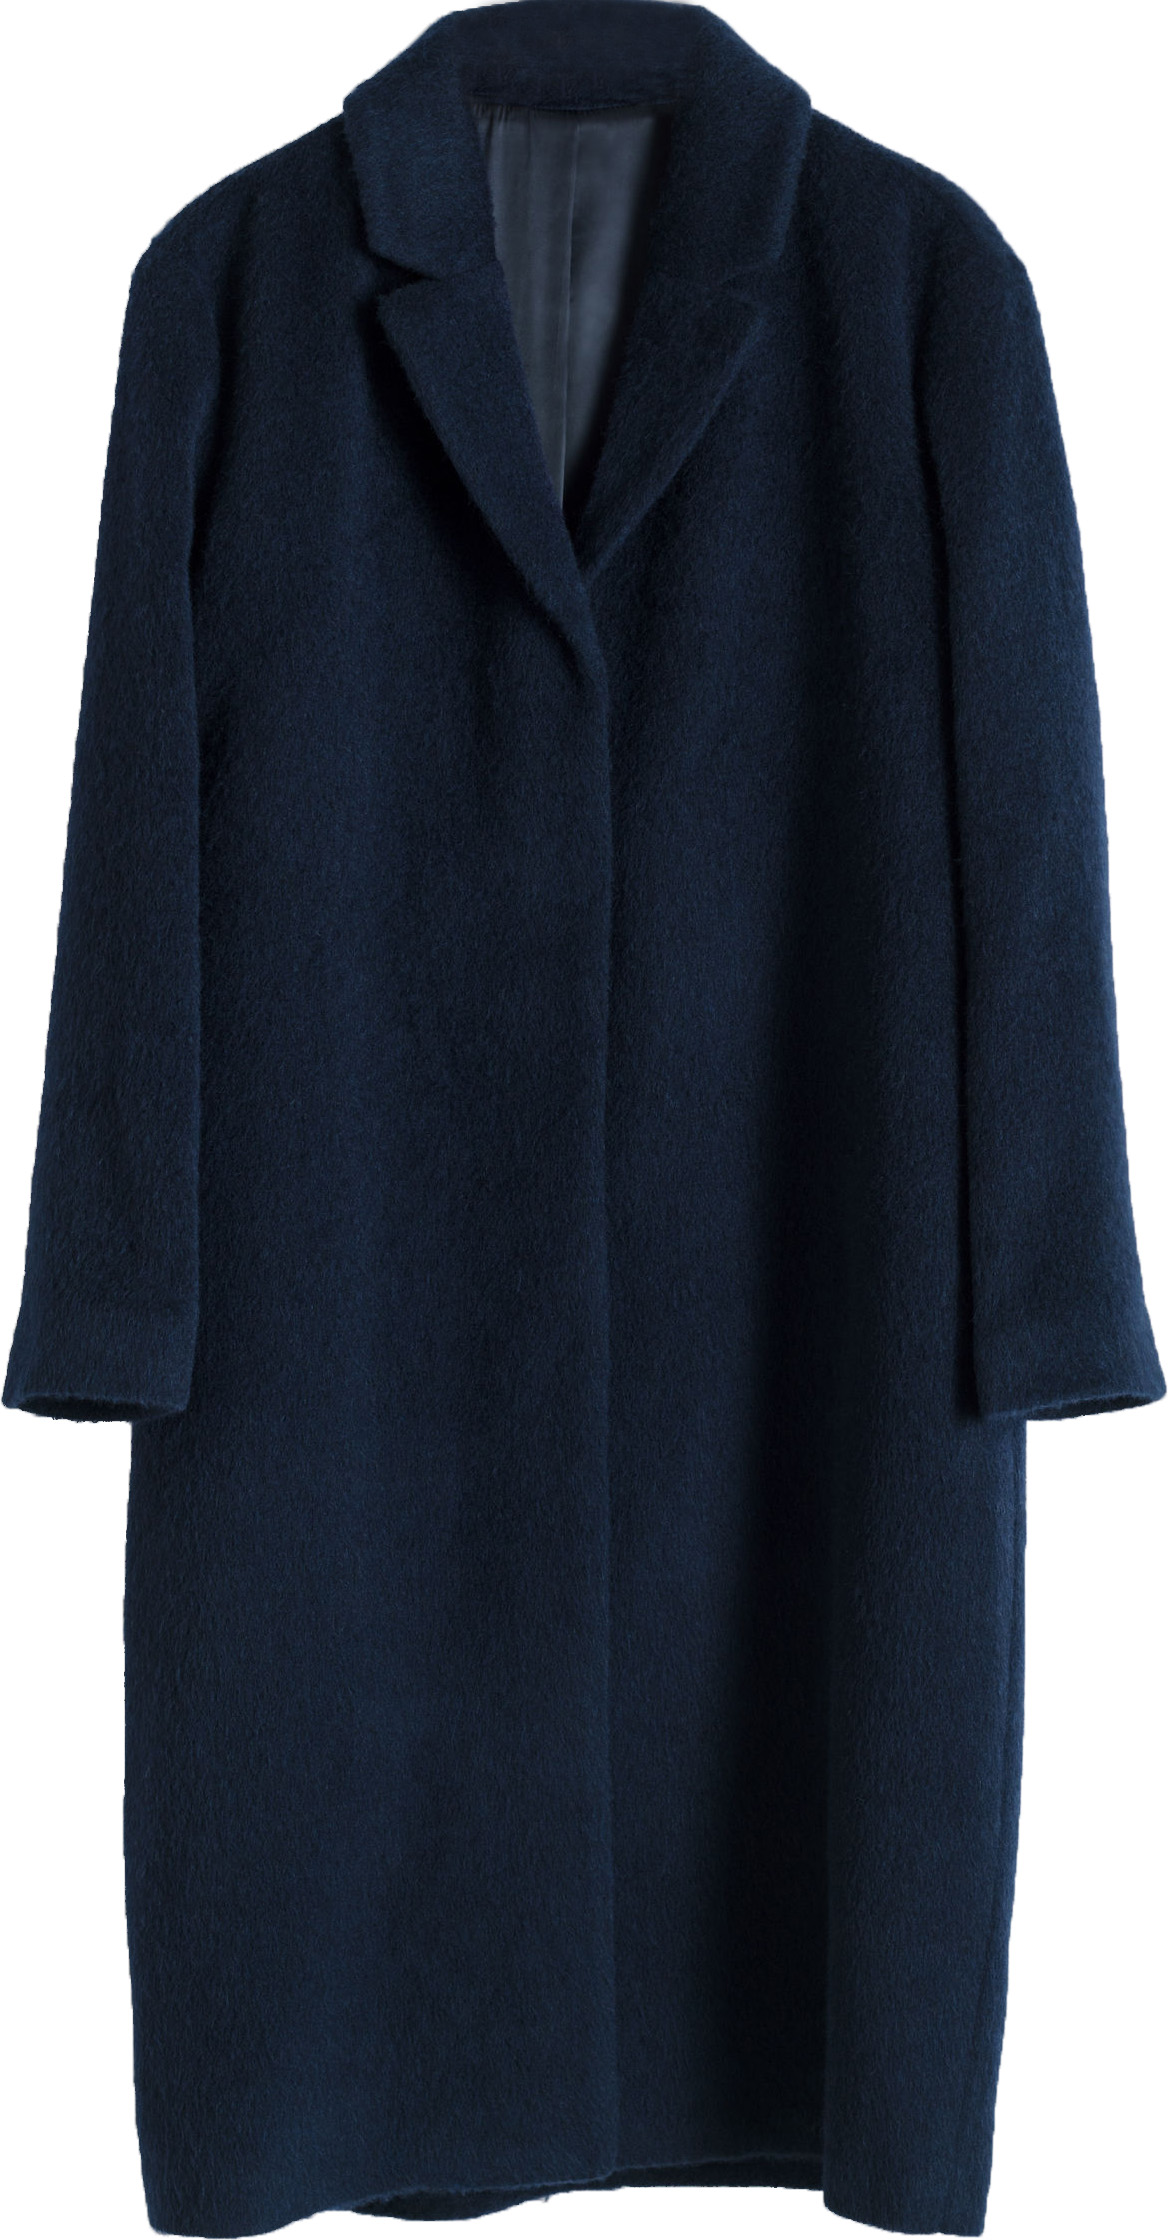 It’s time to think about coats…